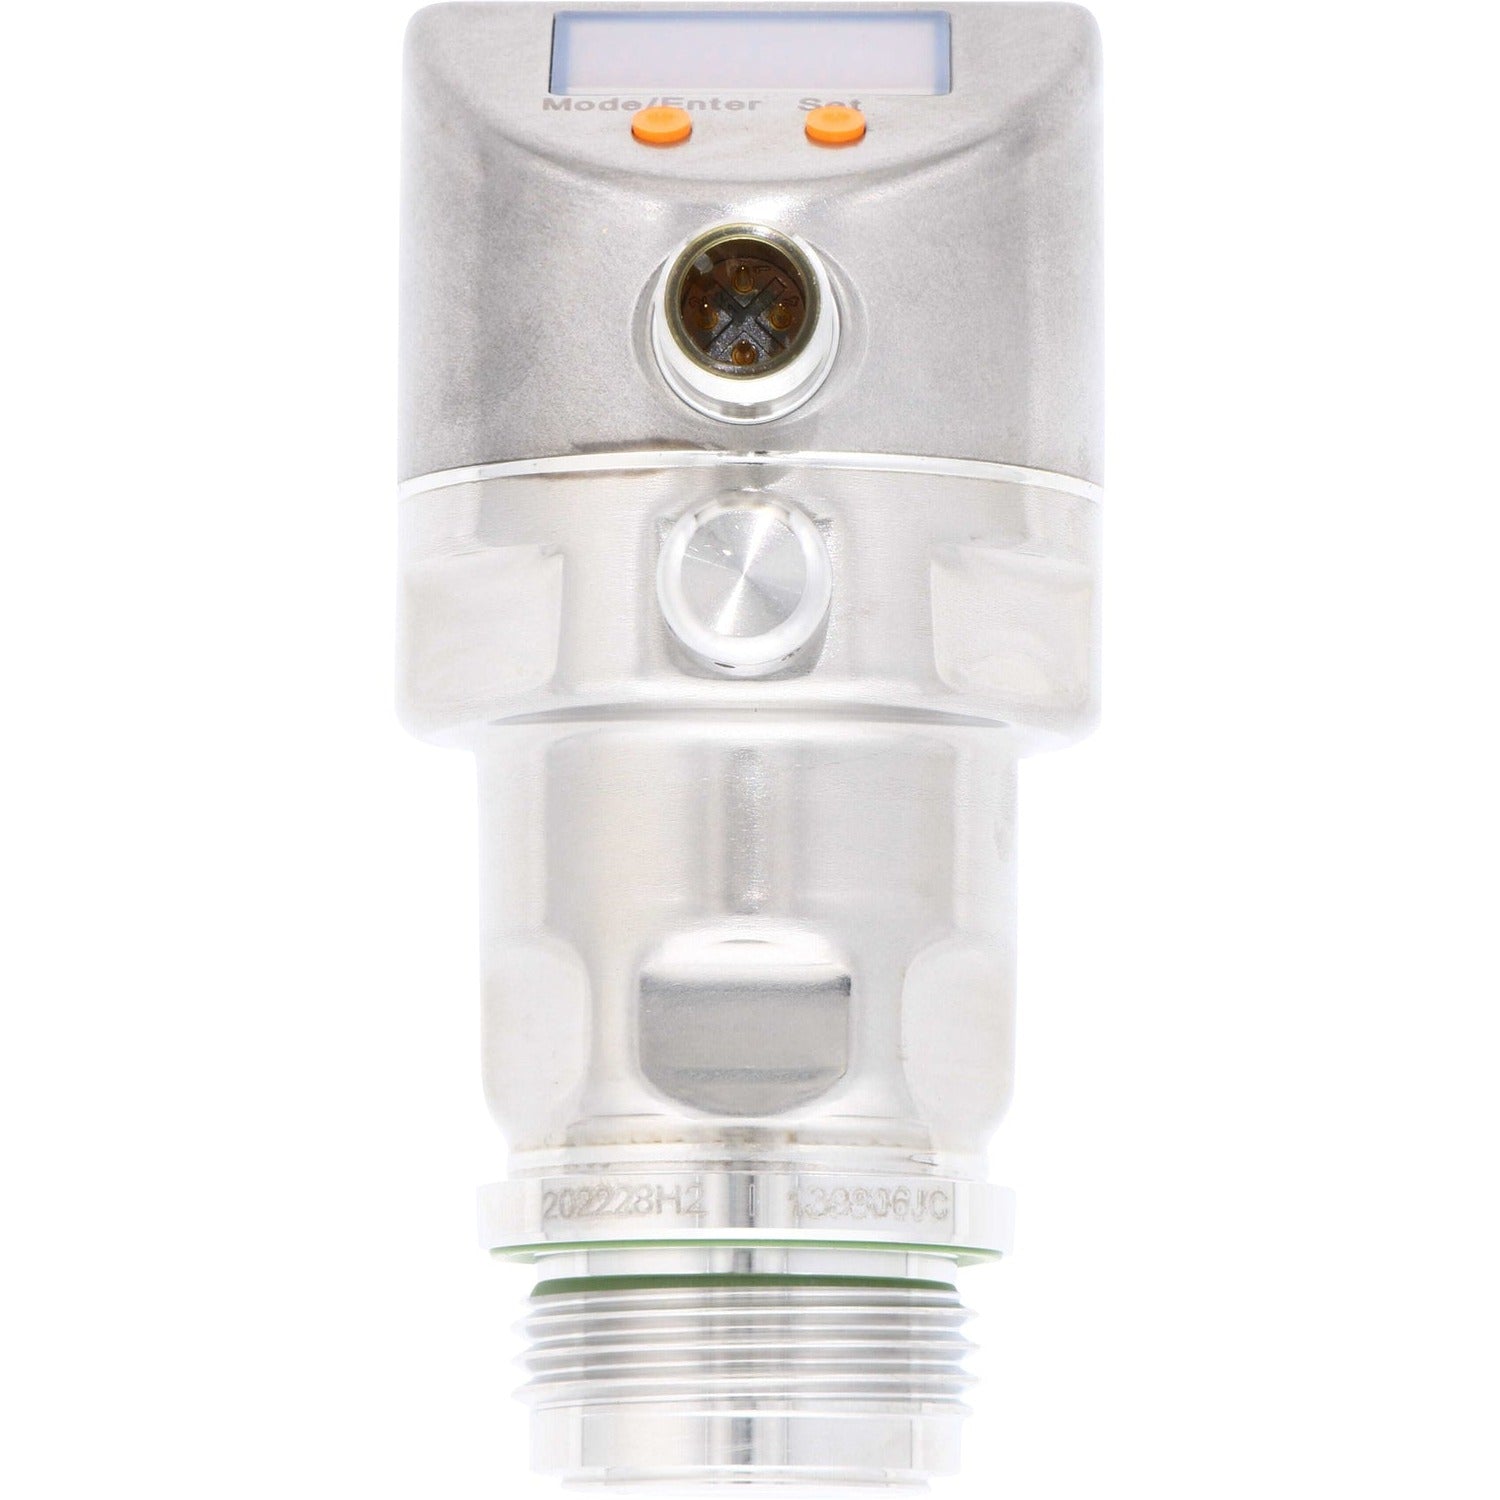 Cylindrical stainless-steel pressure sensor with four pin electrical connection port. Pressure sensor is shown on white background. PI2796